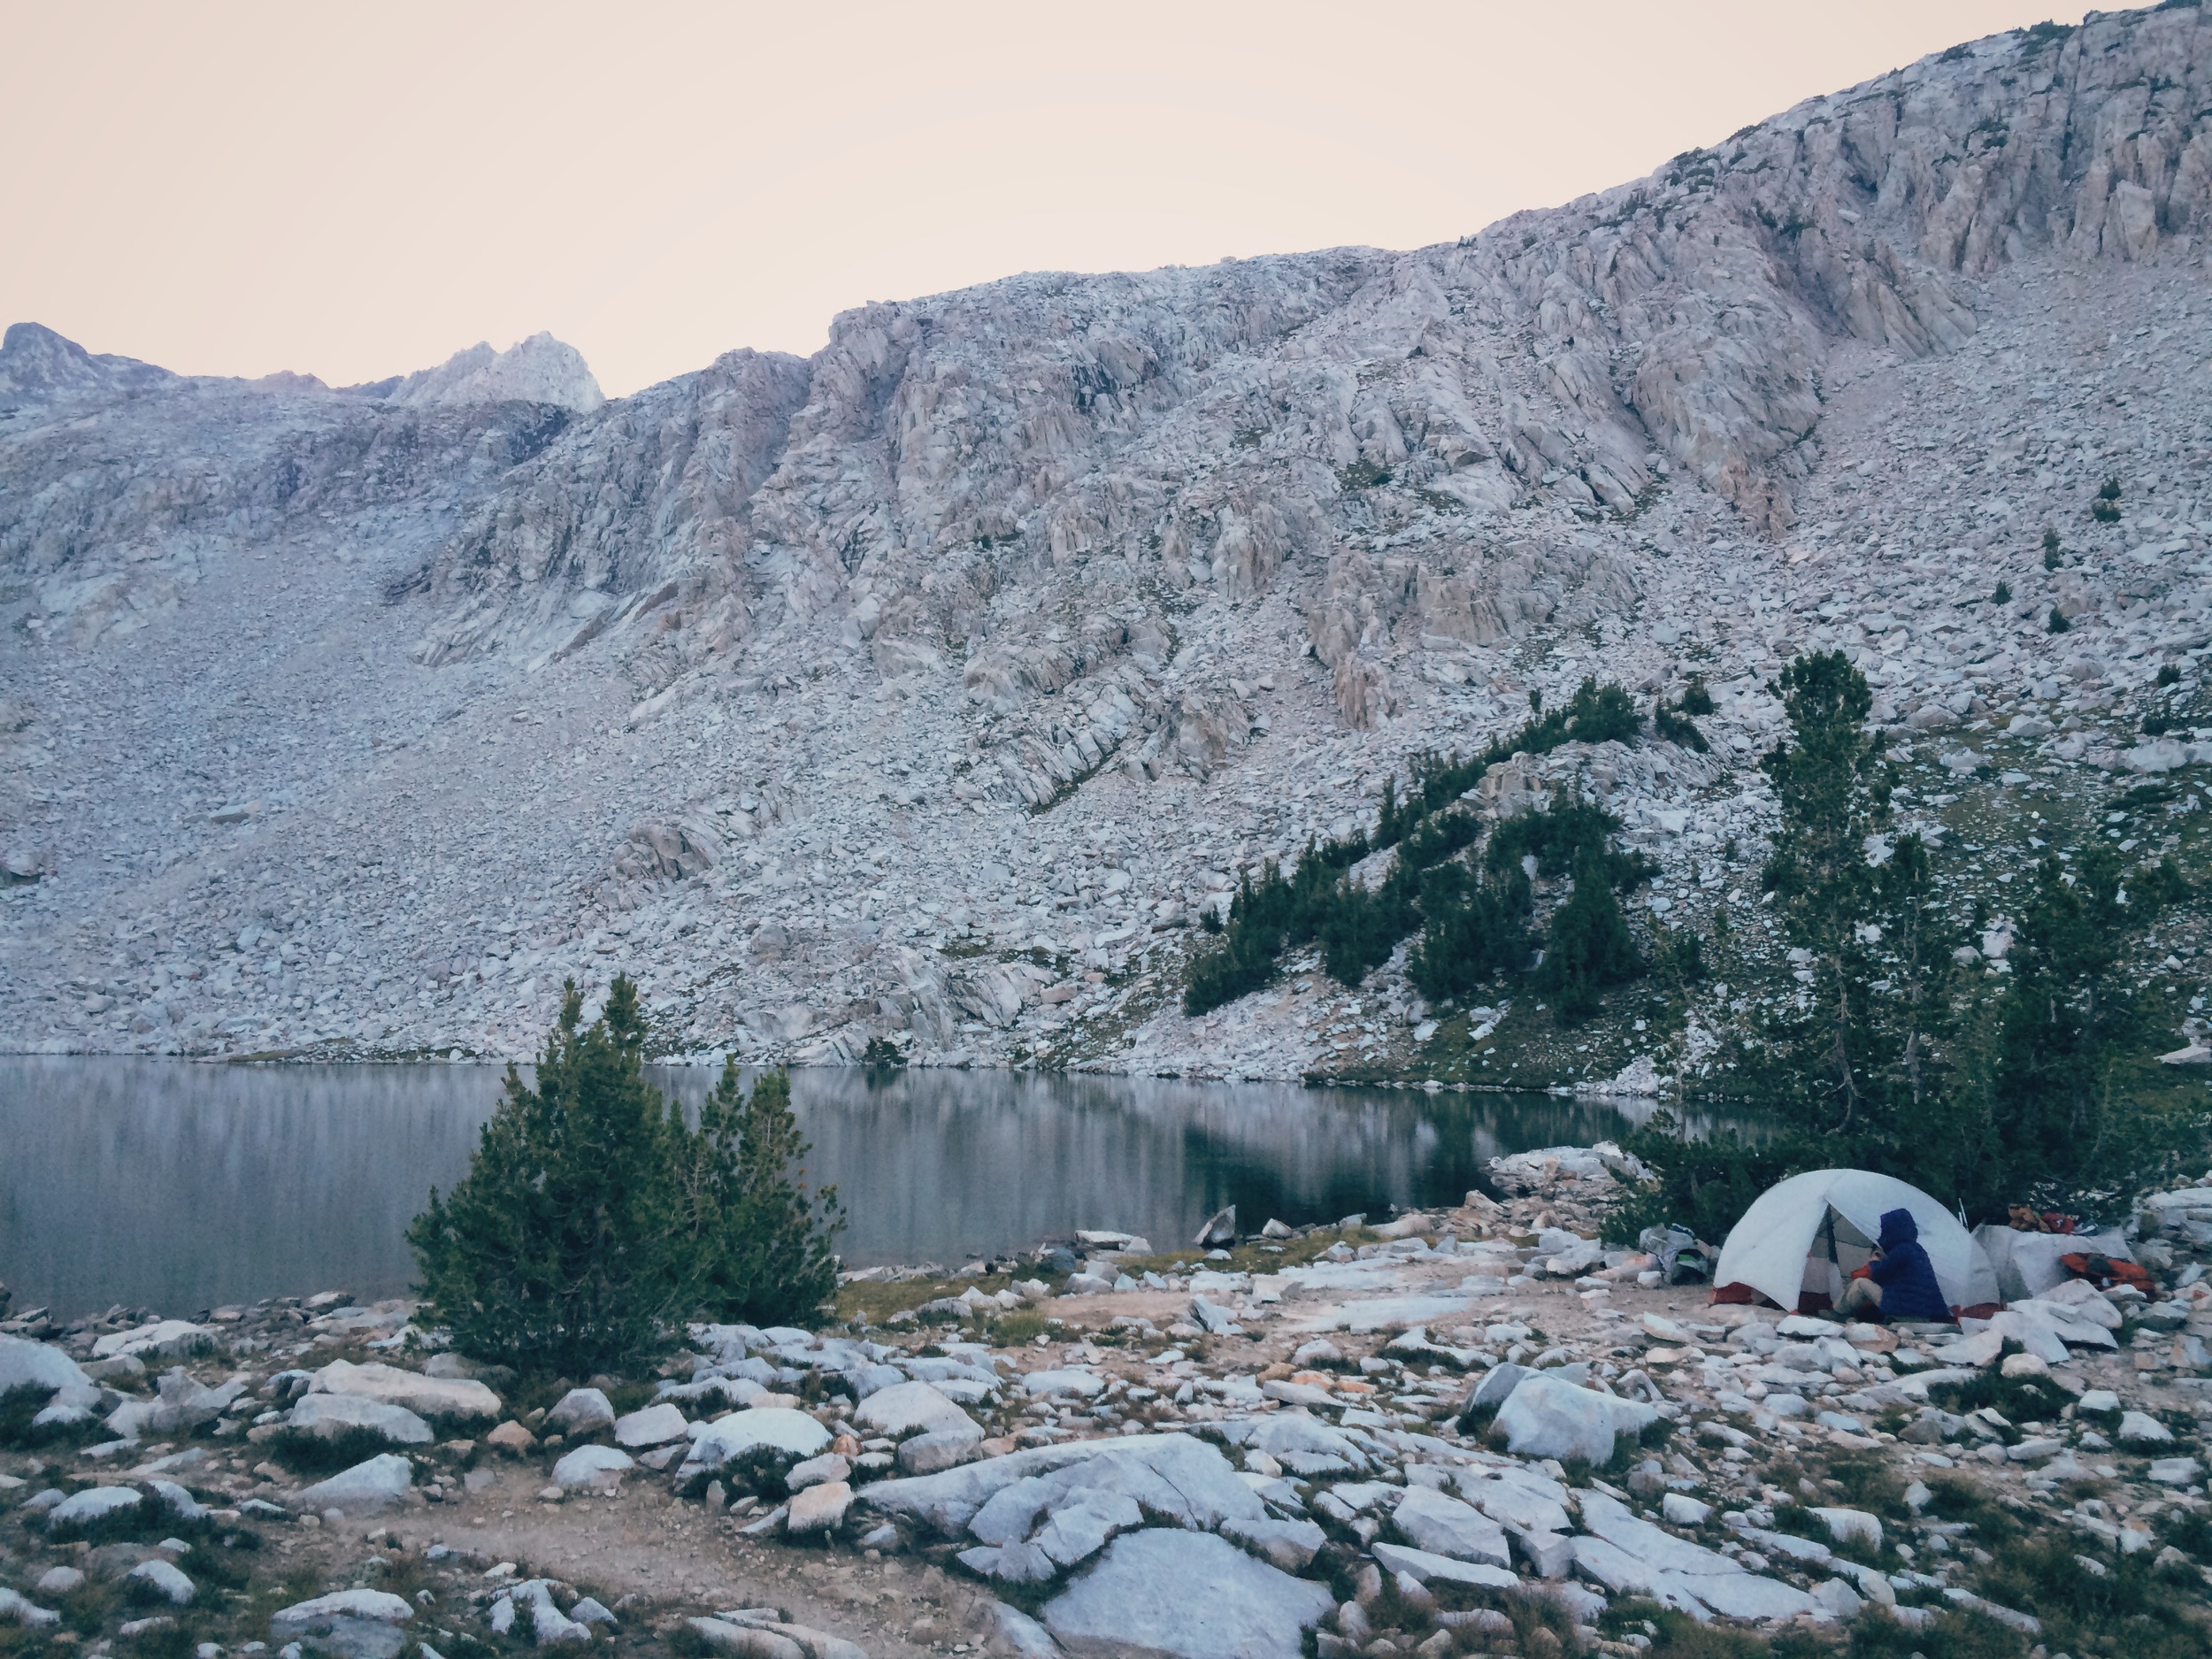  Day 10: camped at the unnamed lake at 10,800' east of Helen Lake. 